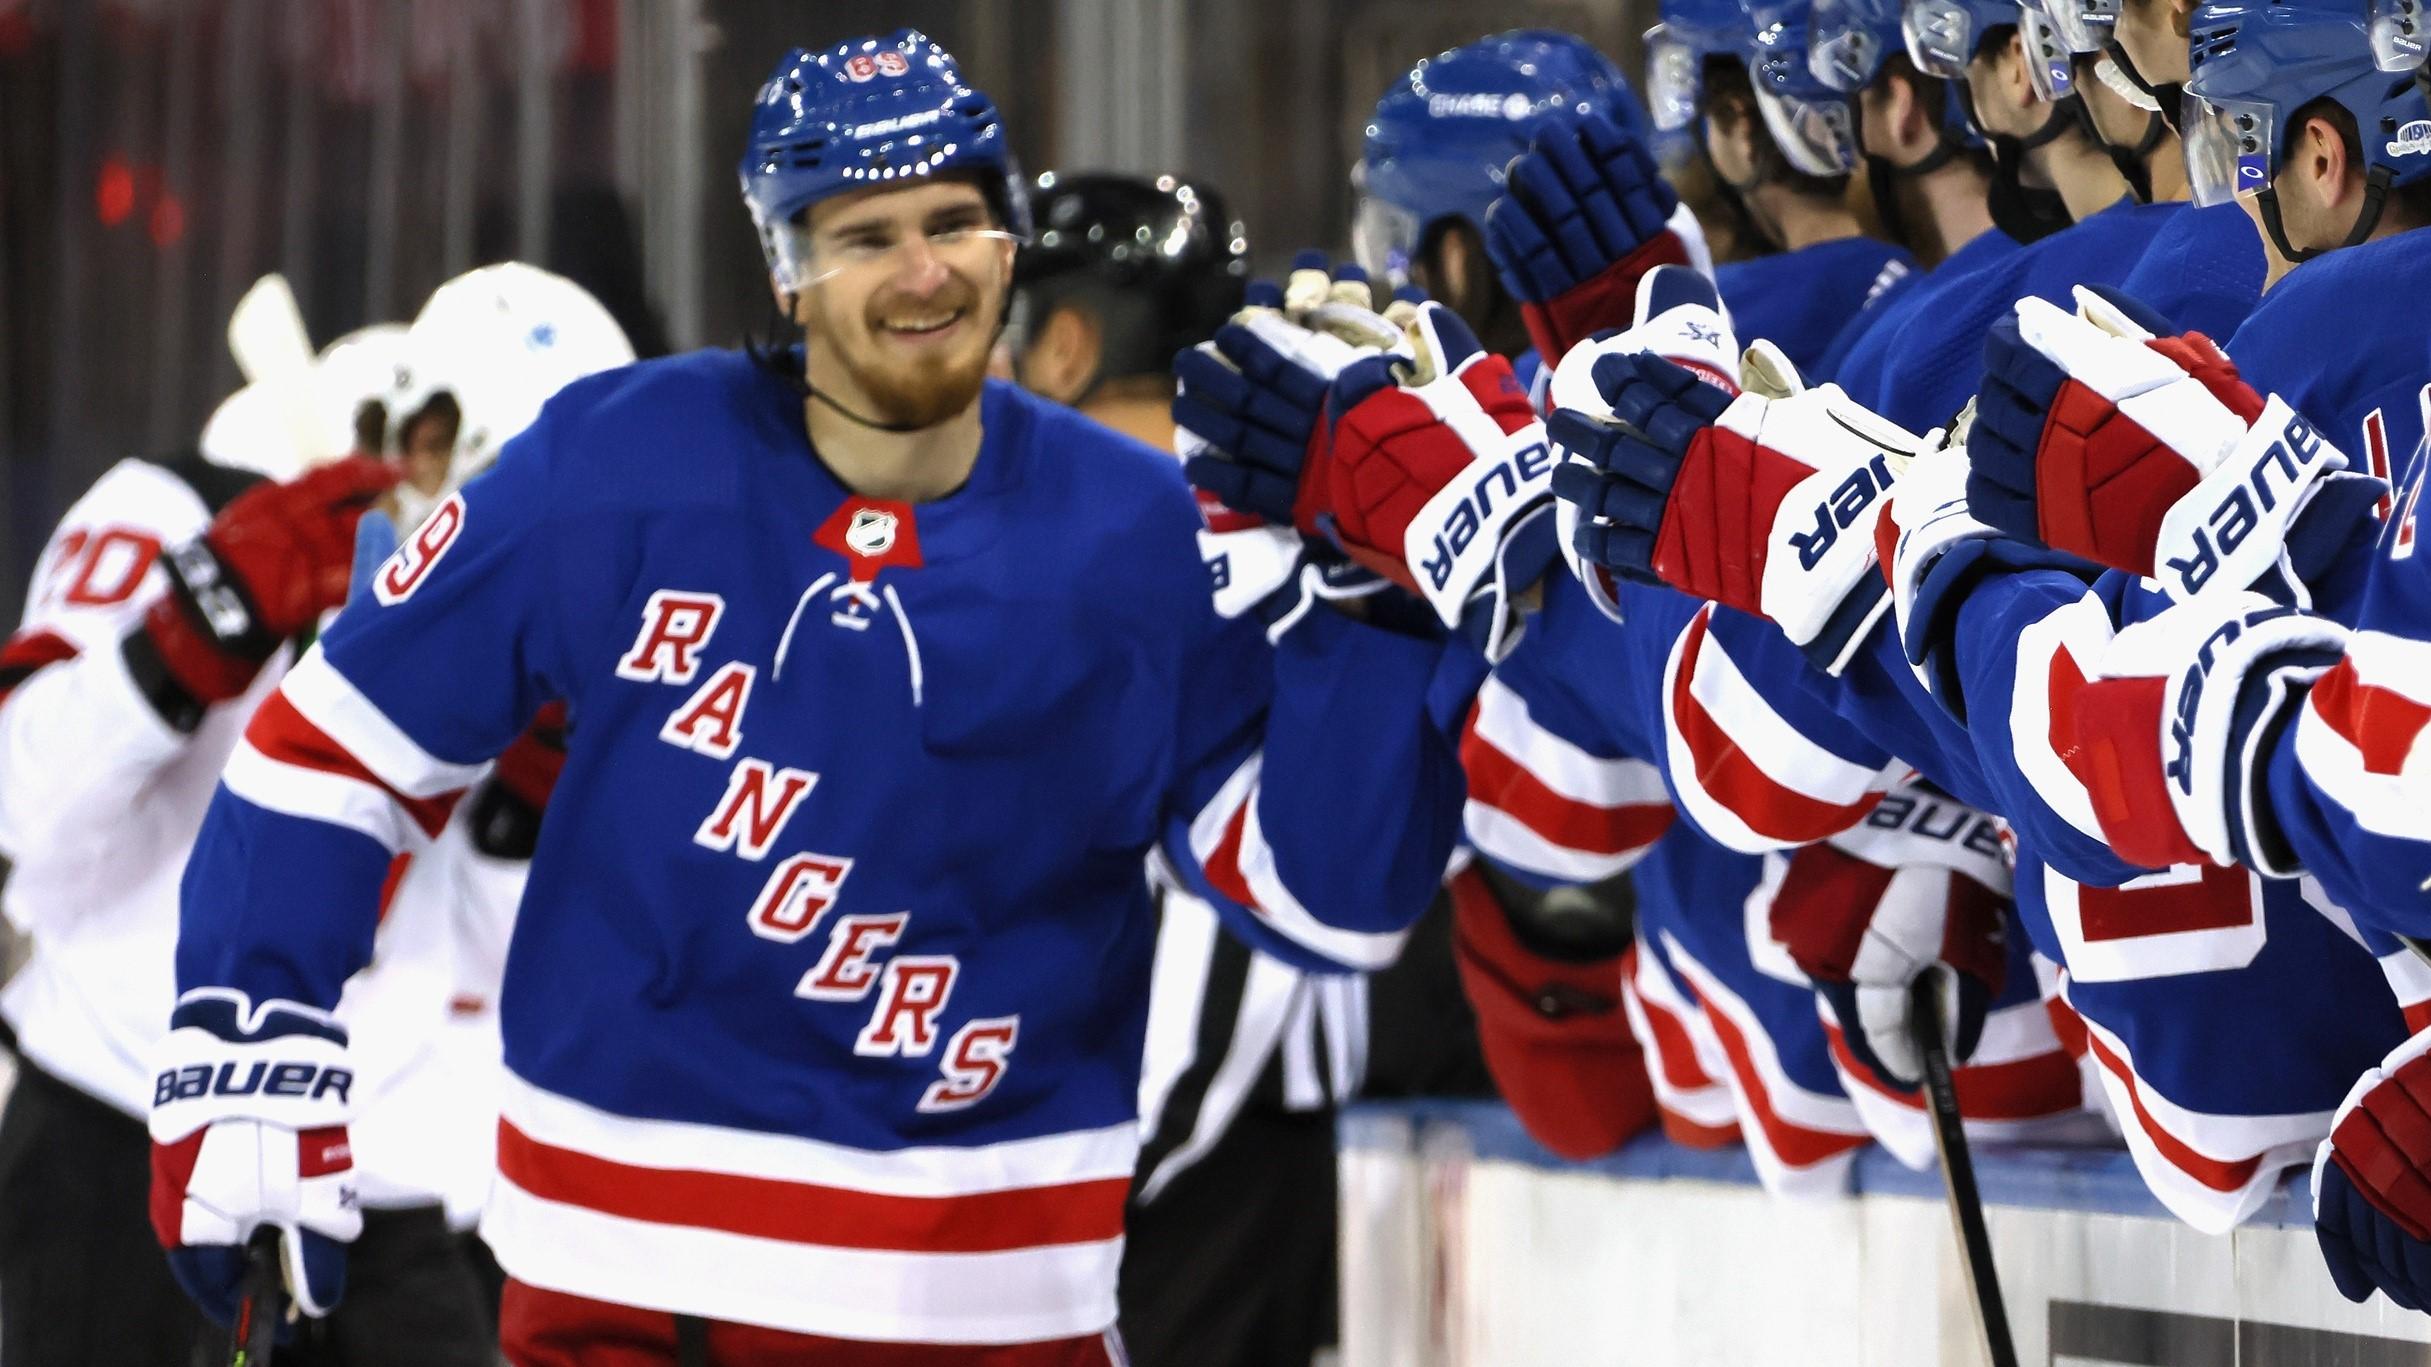 Pavel Buchnevich #89 of the New York Rangers celebrates his 2nd goal of the game at 11:48 of the first period against the New Jersey Devils at Madison Square Garden. / POOL PHOTOS-USA TODAY Sports